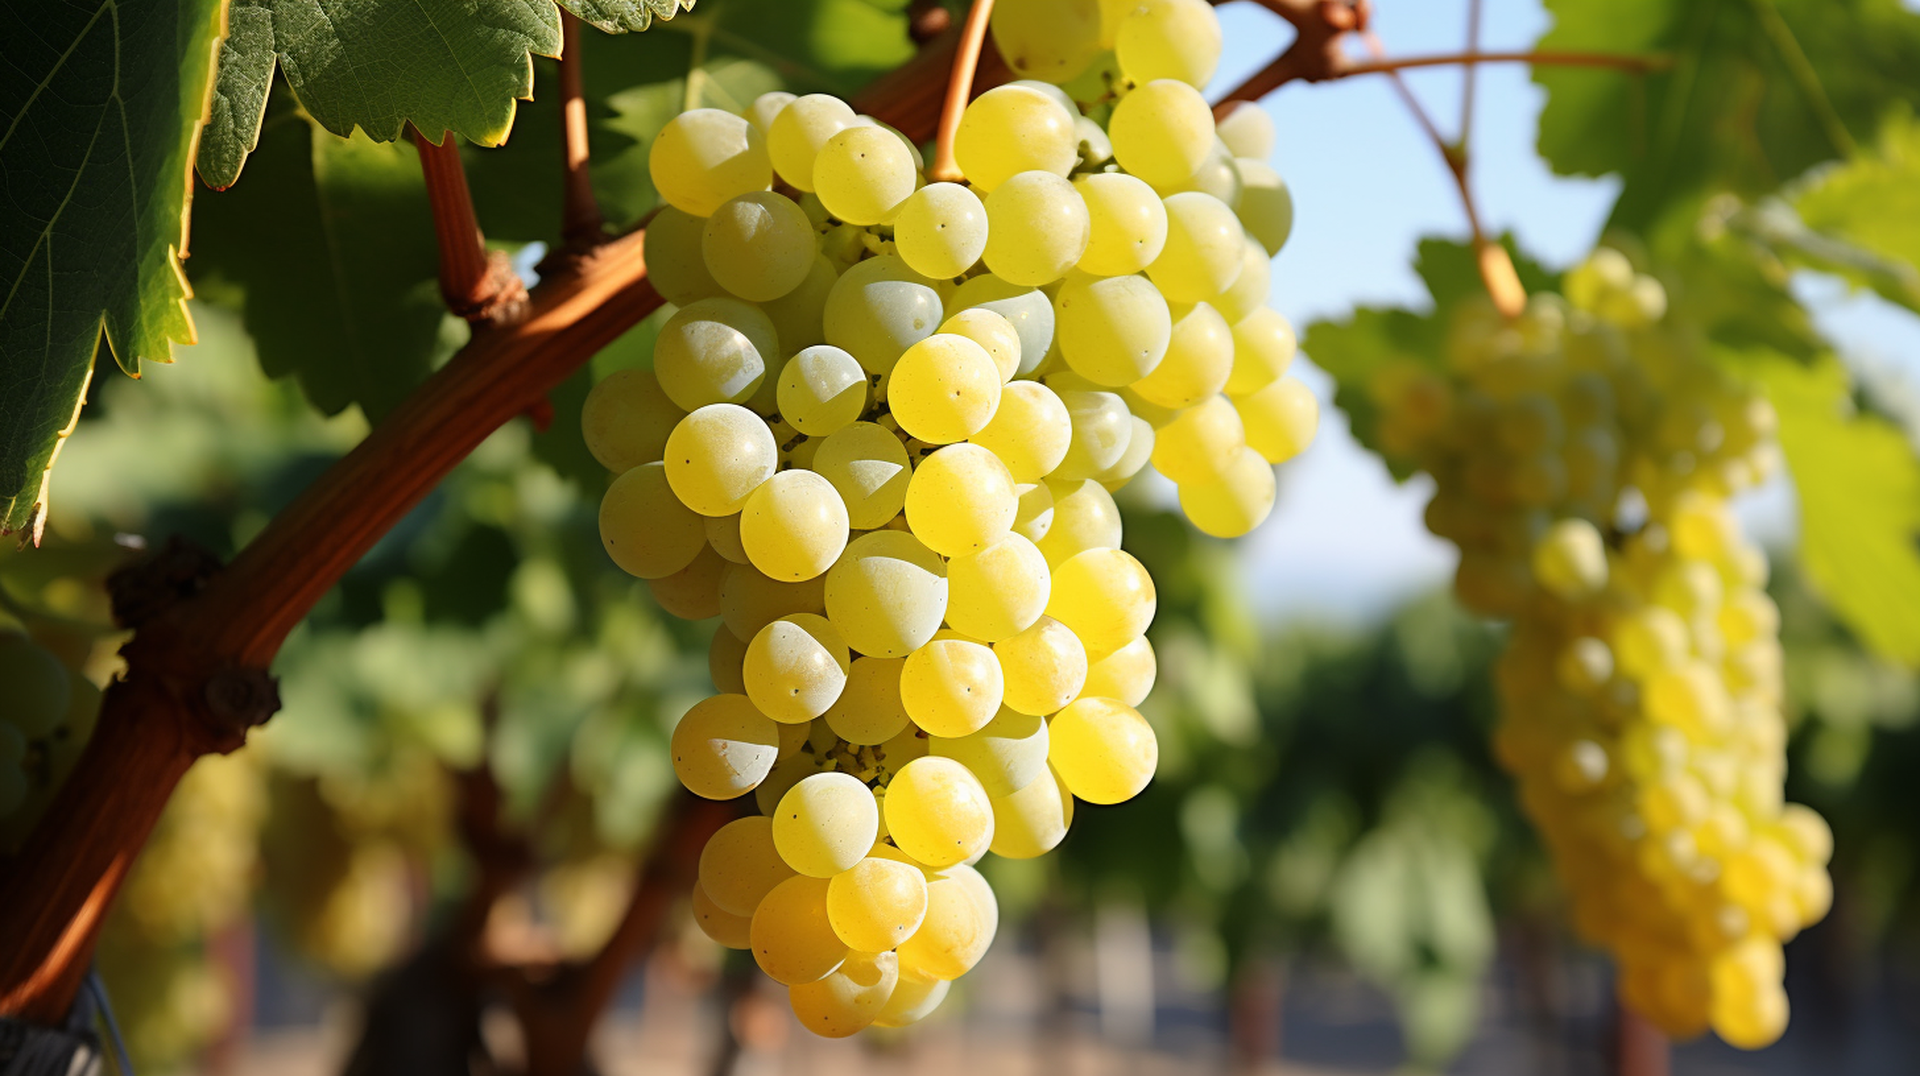 An image showing the warm Mediterranean climate's impact on Muscat grape cultivation for Moscato wine, showing sunny days and cool nights aiding in grape ripening, acidity maintenance, and aromatic enhancement. The image highlights tropical passion fruit flavors, high sugar content, and low acidity in grapes, essential for the sweet and refreshing taste of sparkling and pink Moscato wines, emphasizing the climate's role in developing Moscato's unique tropical flavors.